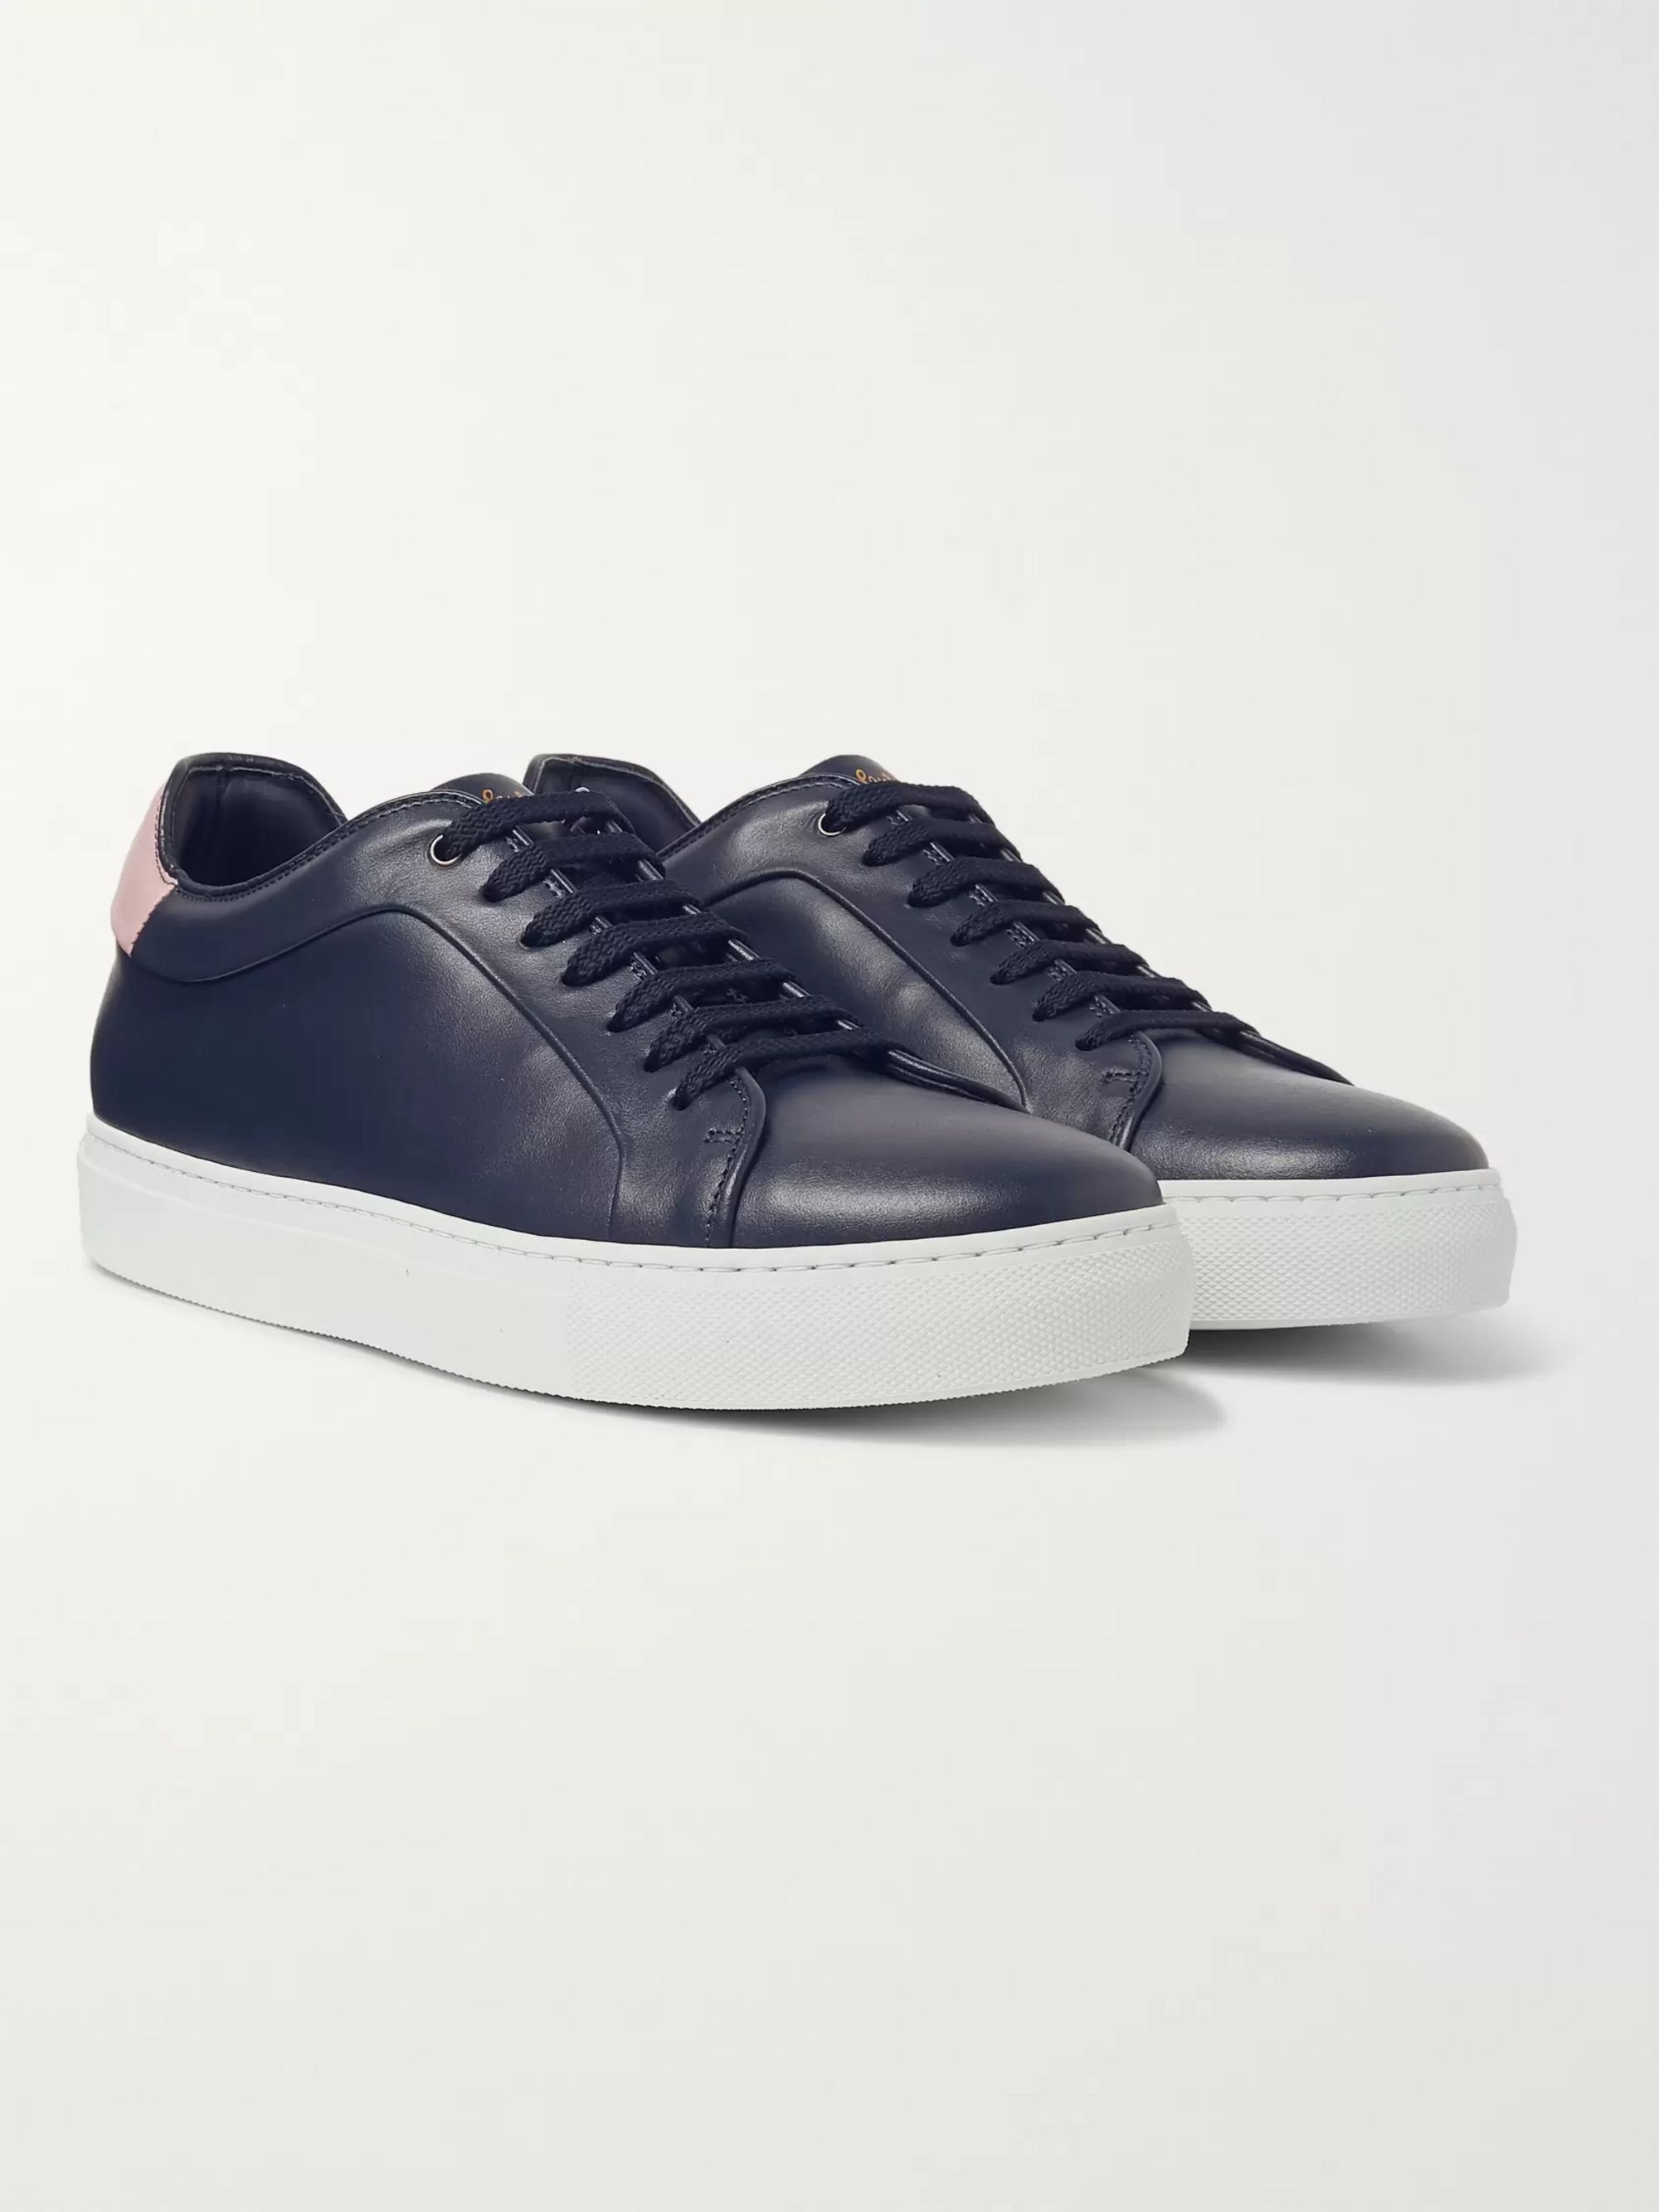 Leather Sneakers | Paul Smith | MR PORTER